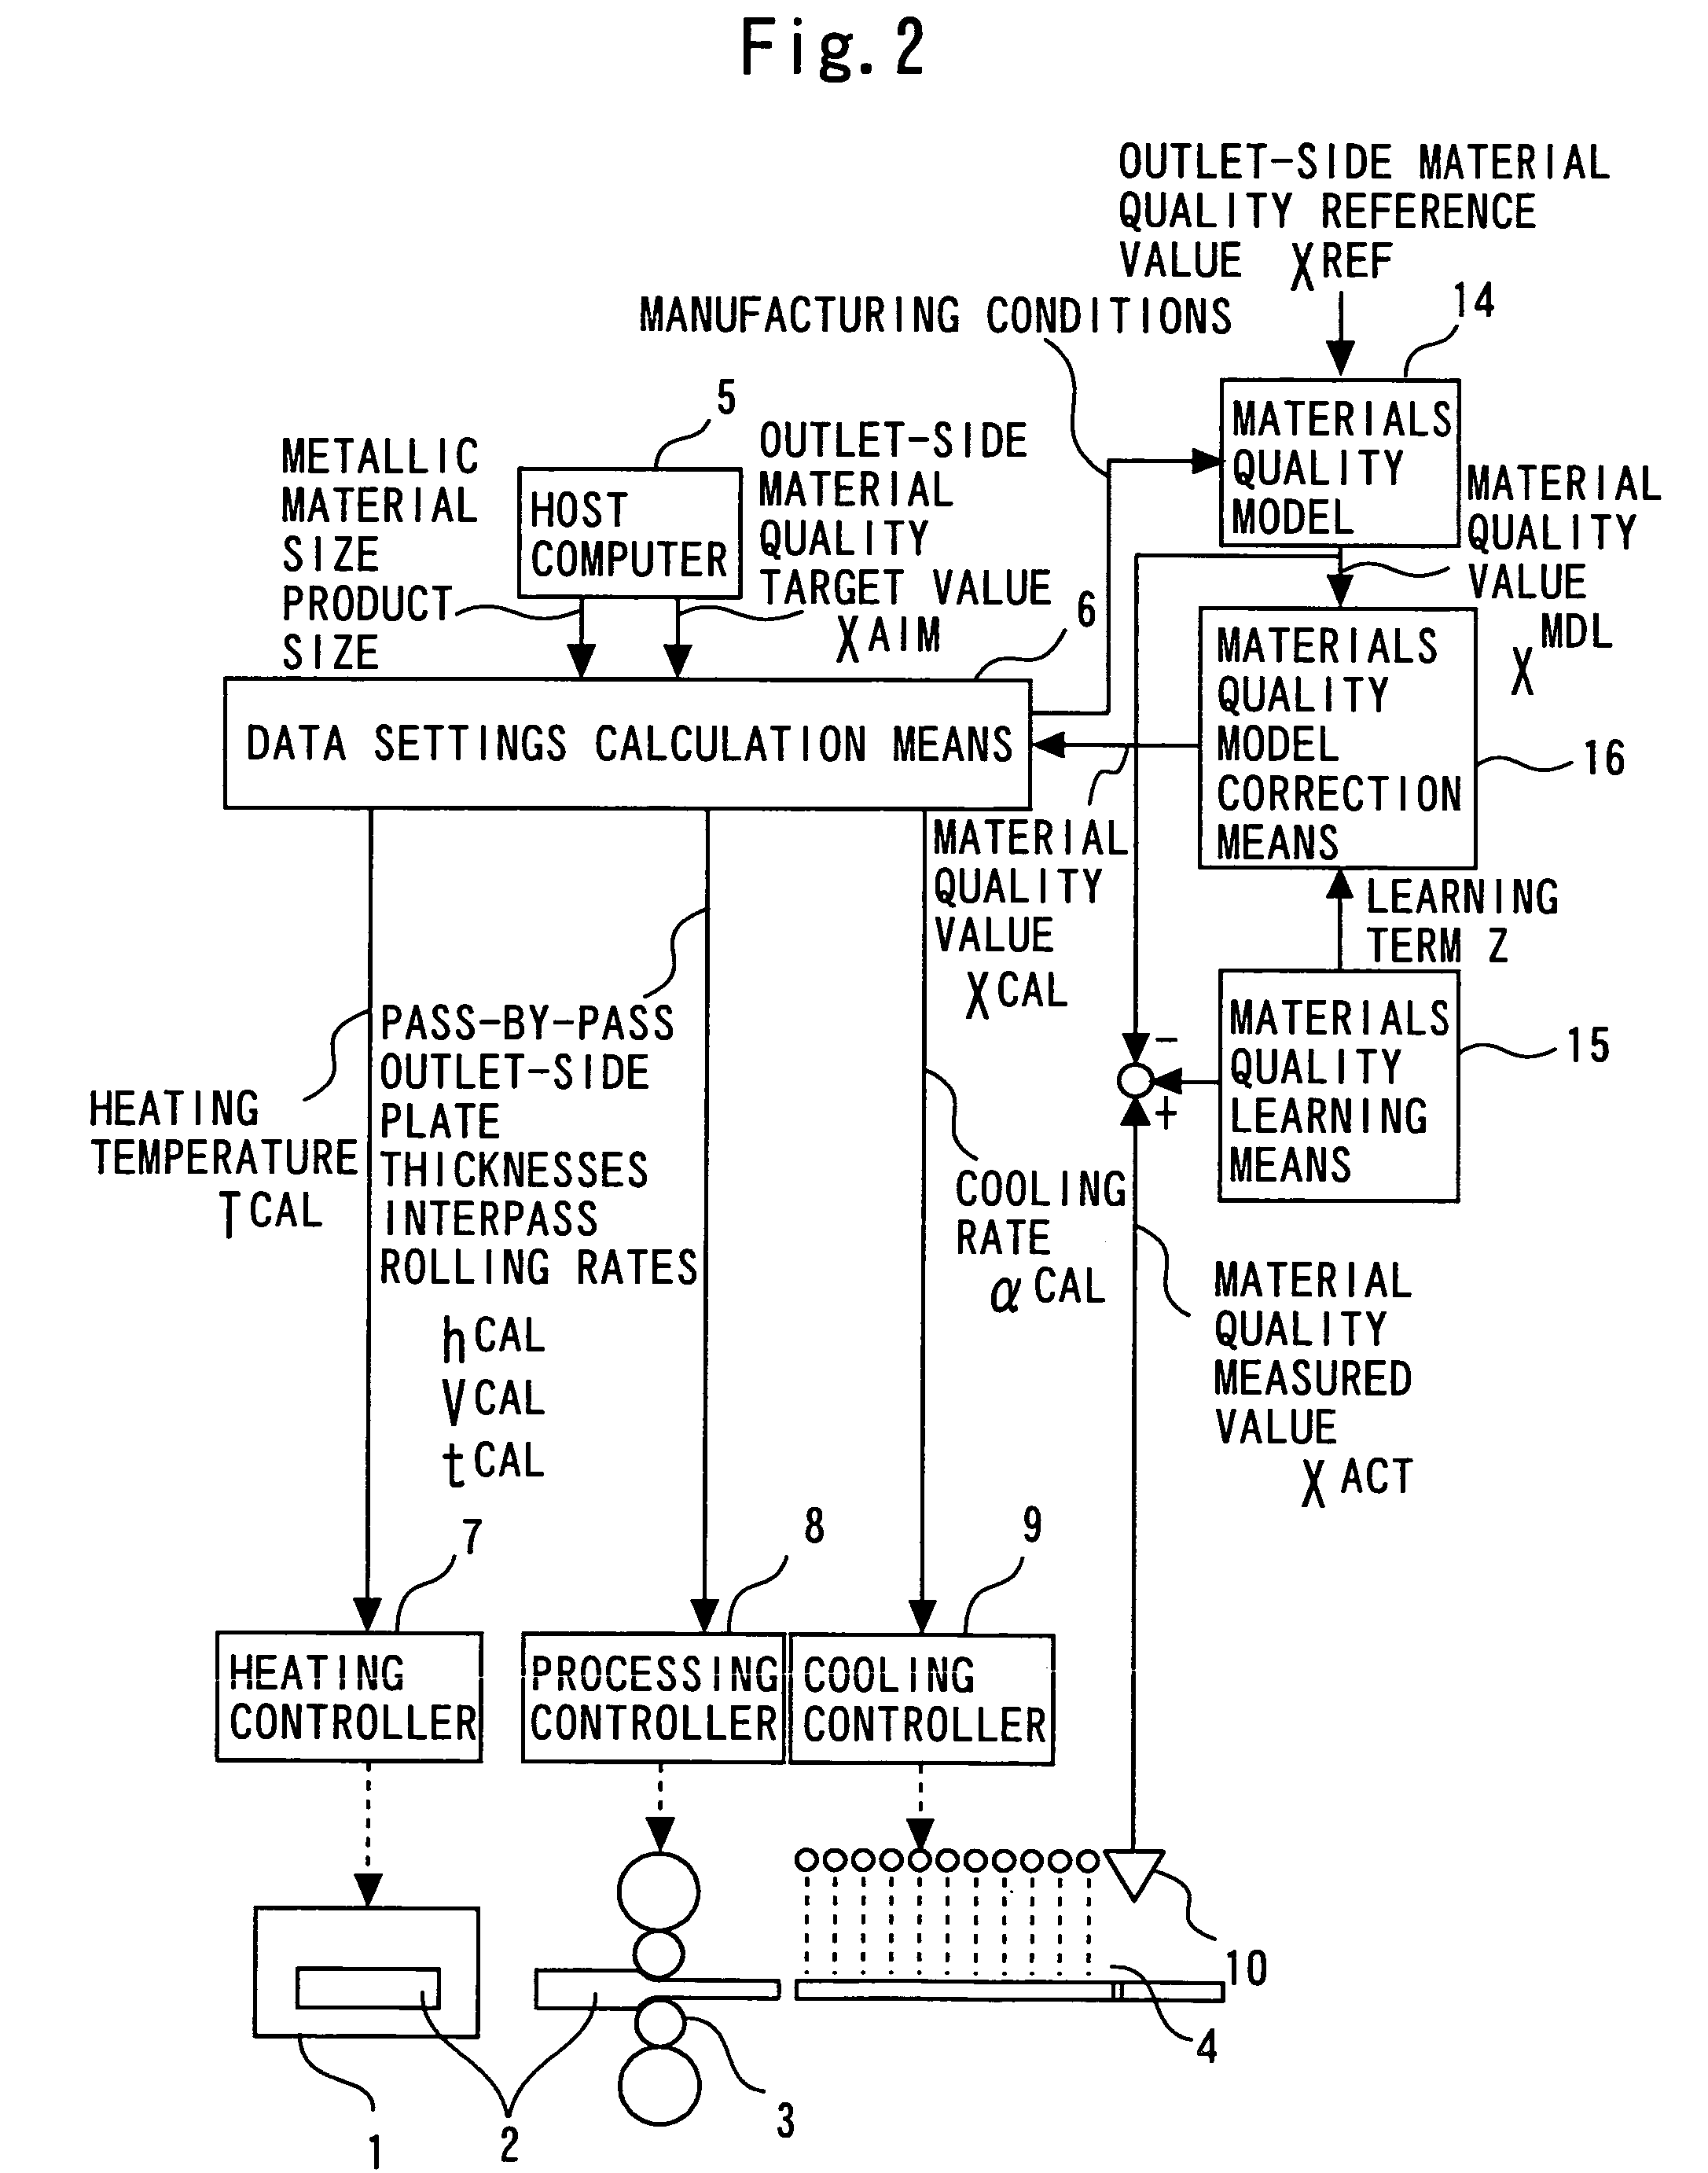 Apparatus for controlling materials quality in rolling, forging, or leveling process